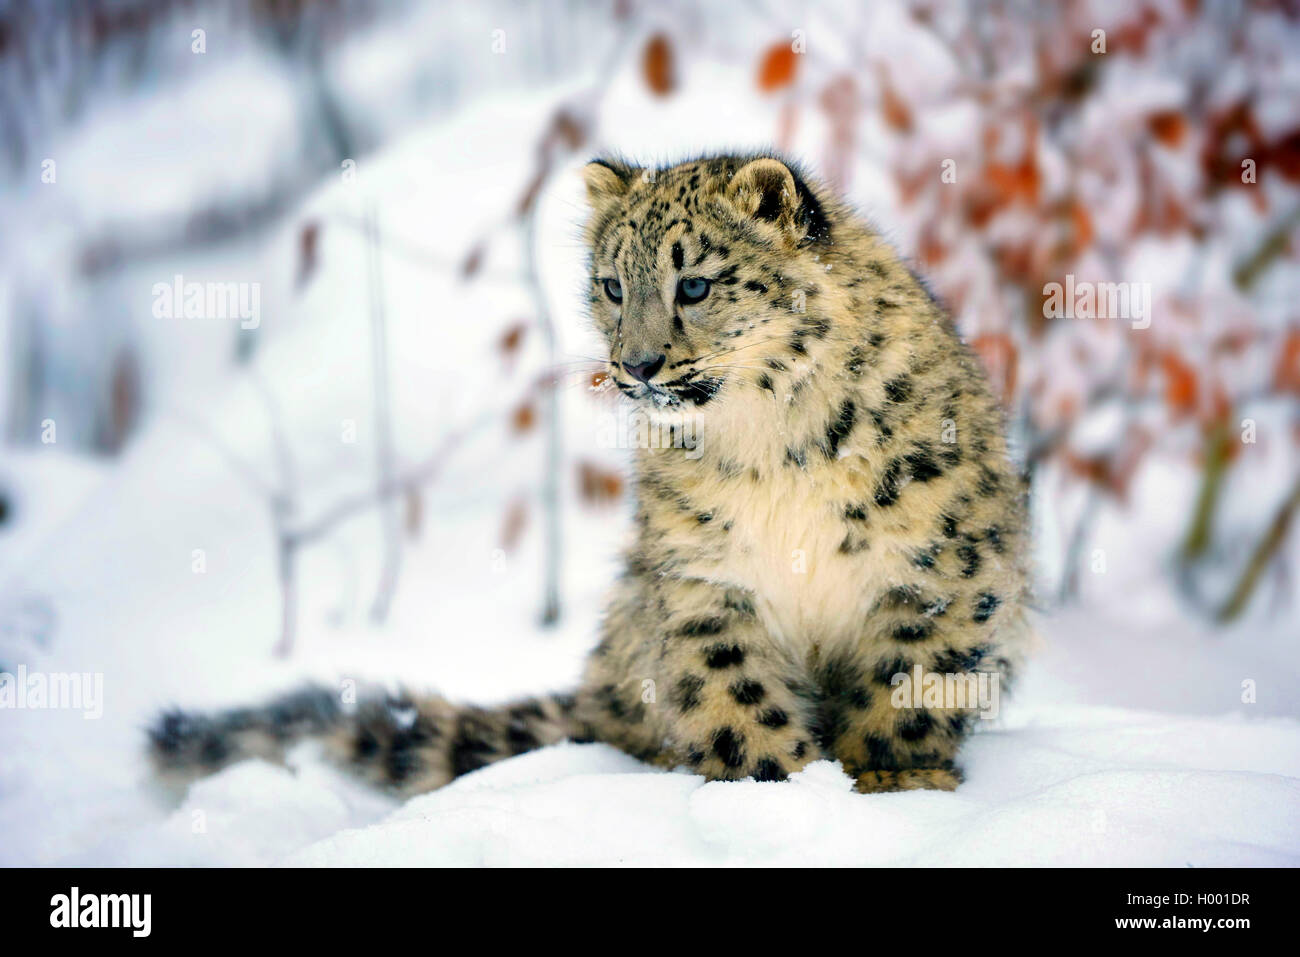 snow leopard (Uncia uncia, Panthera uncia), young animal sitting in snow Stock Photo